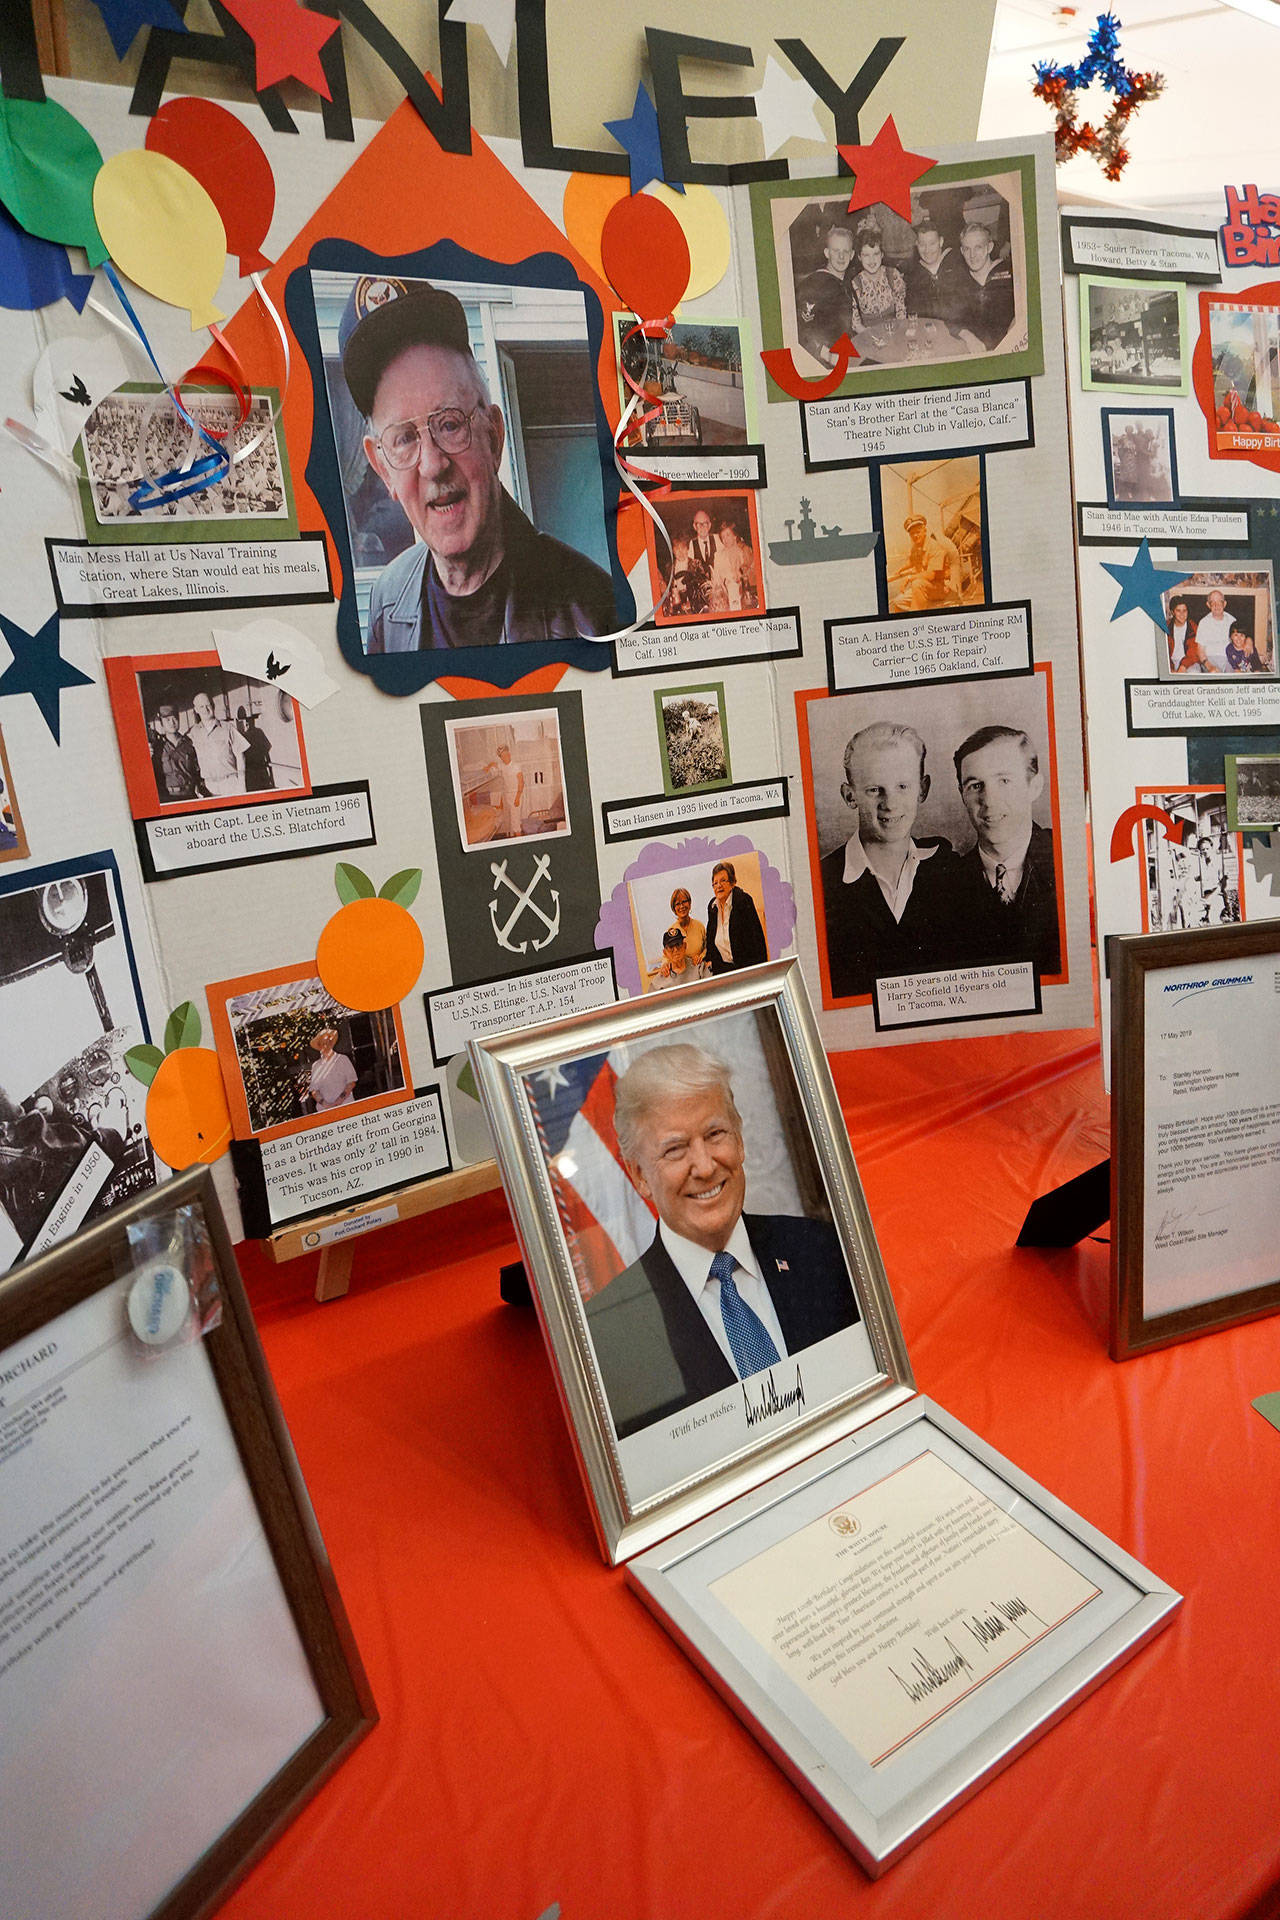 A collection of photographic memories, including congratulatory letters from President Trump and Gov. Inslee, are displayed at Stanley Hansen’s 100th birthday celebration. (Bob Smith | Kitsap Daily News)